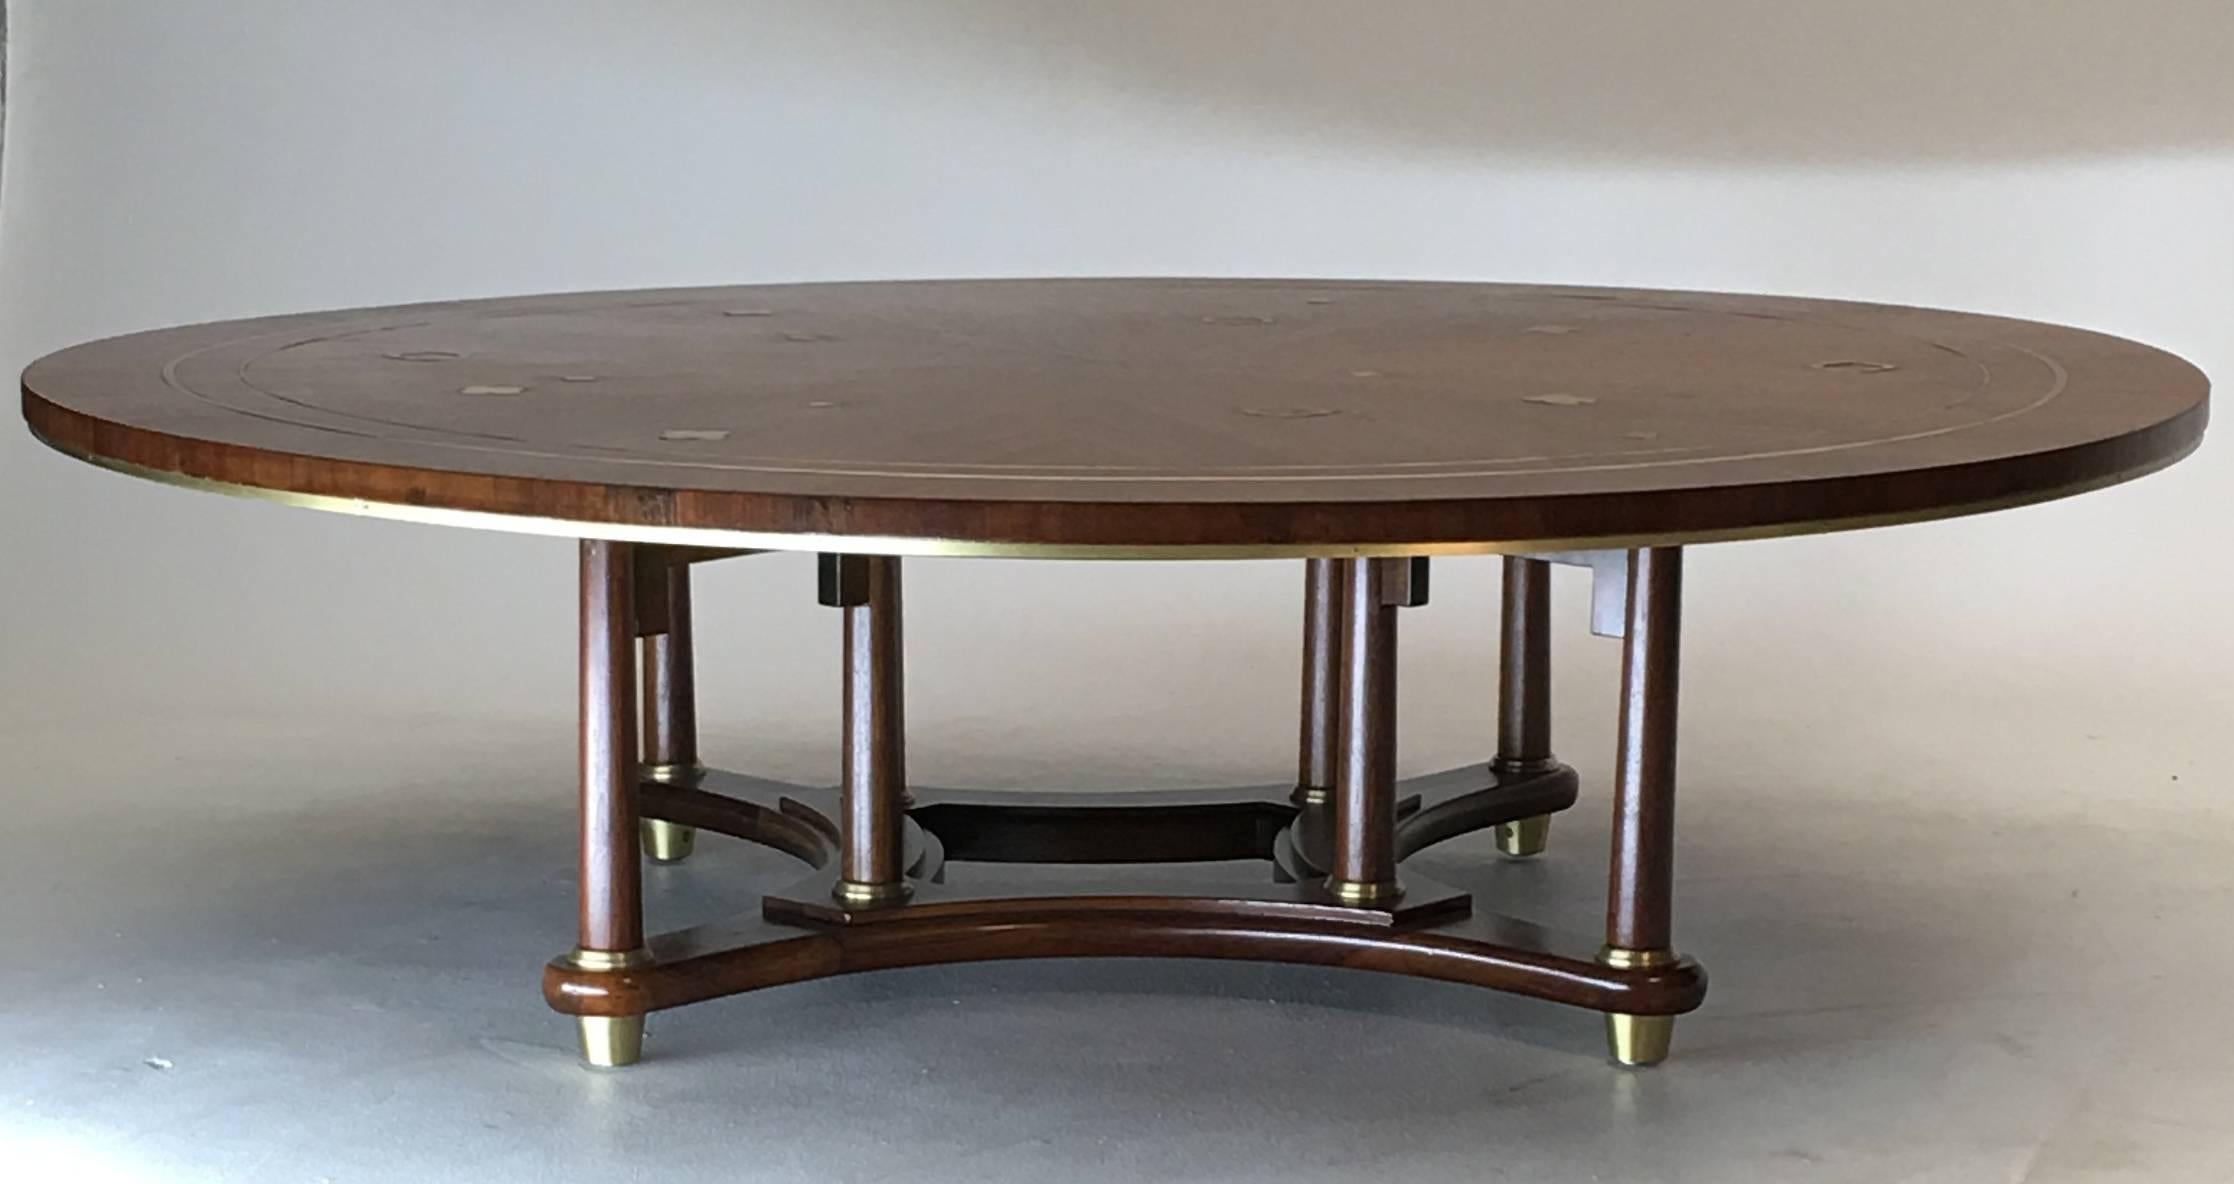 Gorgeous 5 foot coffee with inlaid brass on top surface and design accents throughout. This table was part of the 